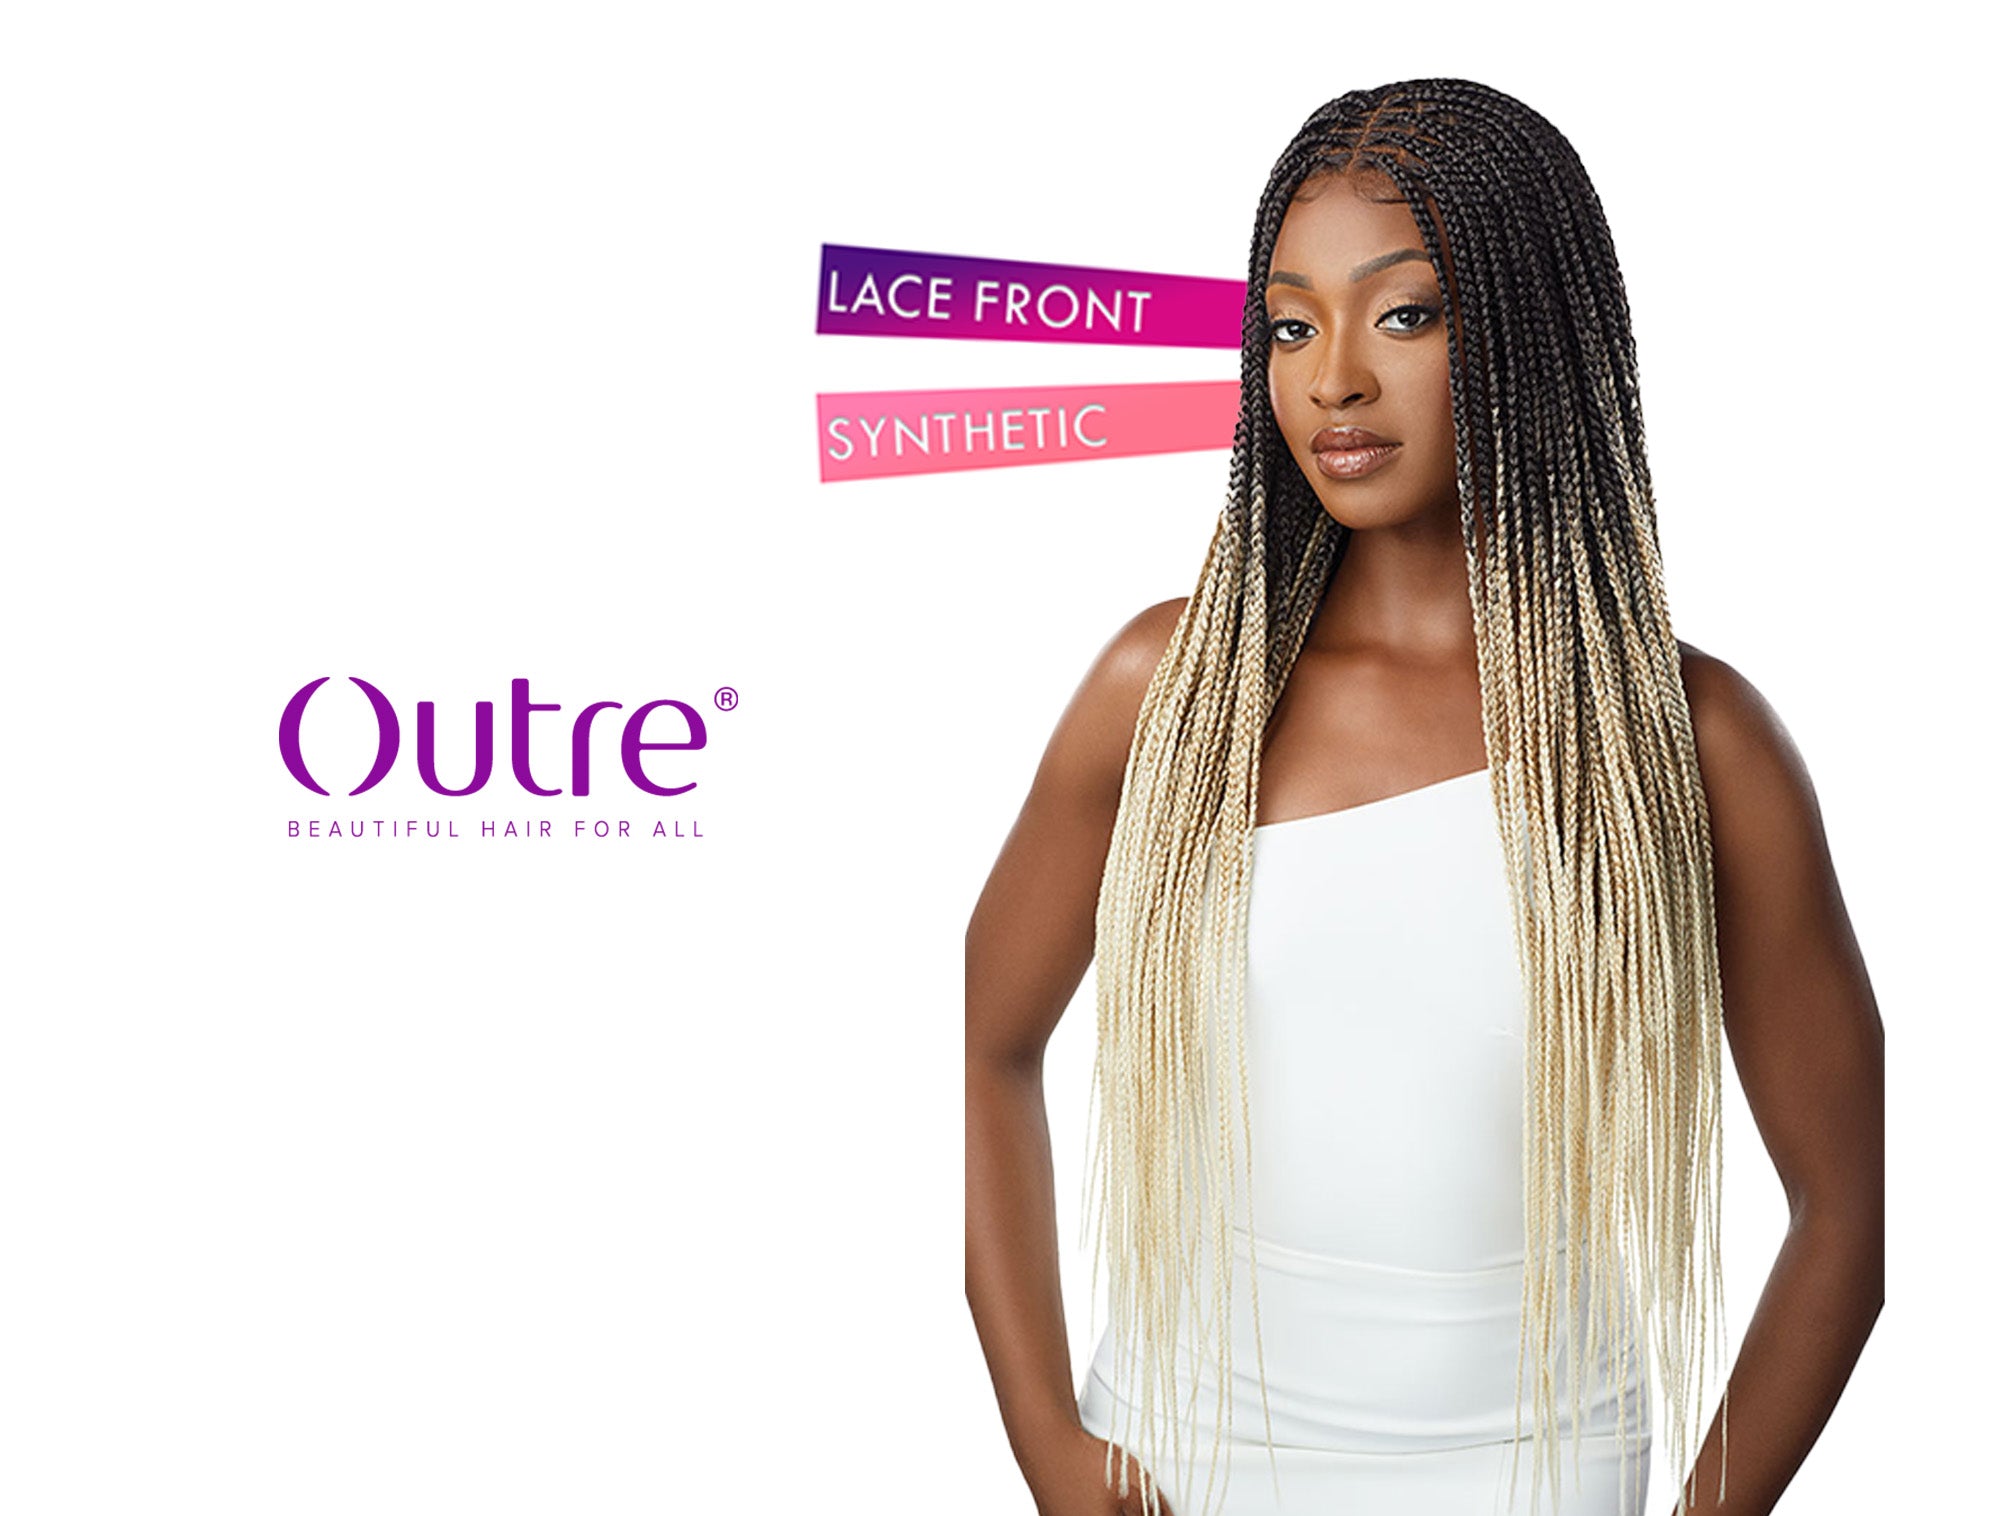 Knotless Braids with Curls Over Hip-Length 36 Full Double Lace Small Box  Square Box Braided Wig